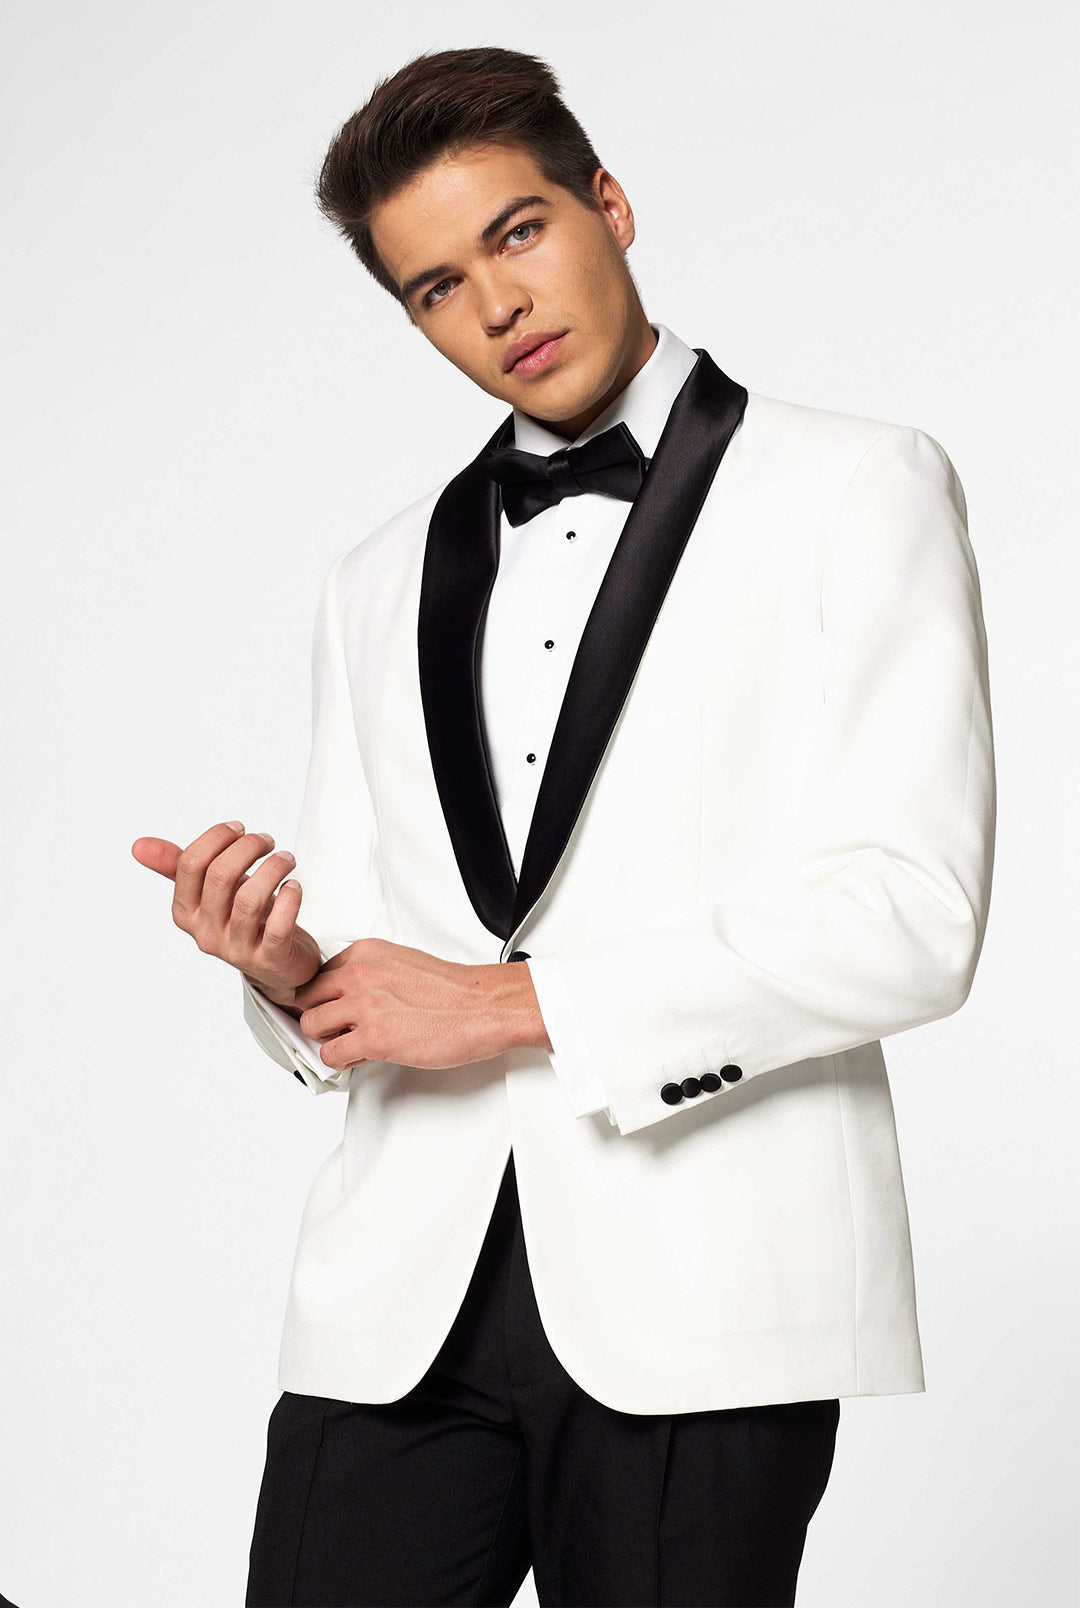 How to Measure for a Tuxedo at Home